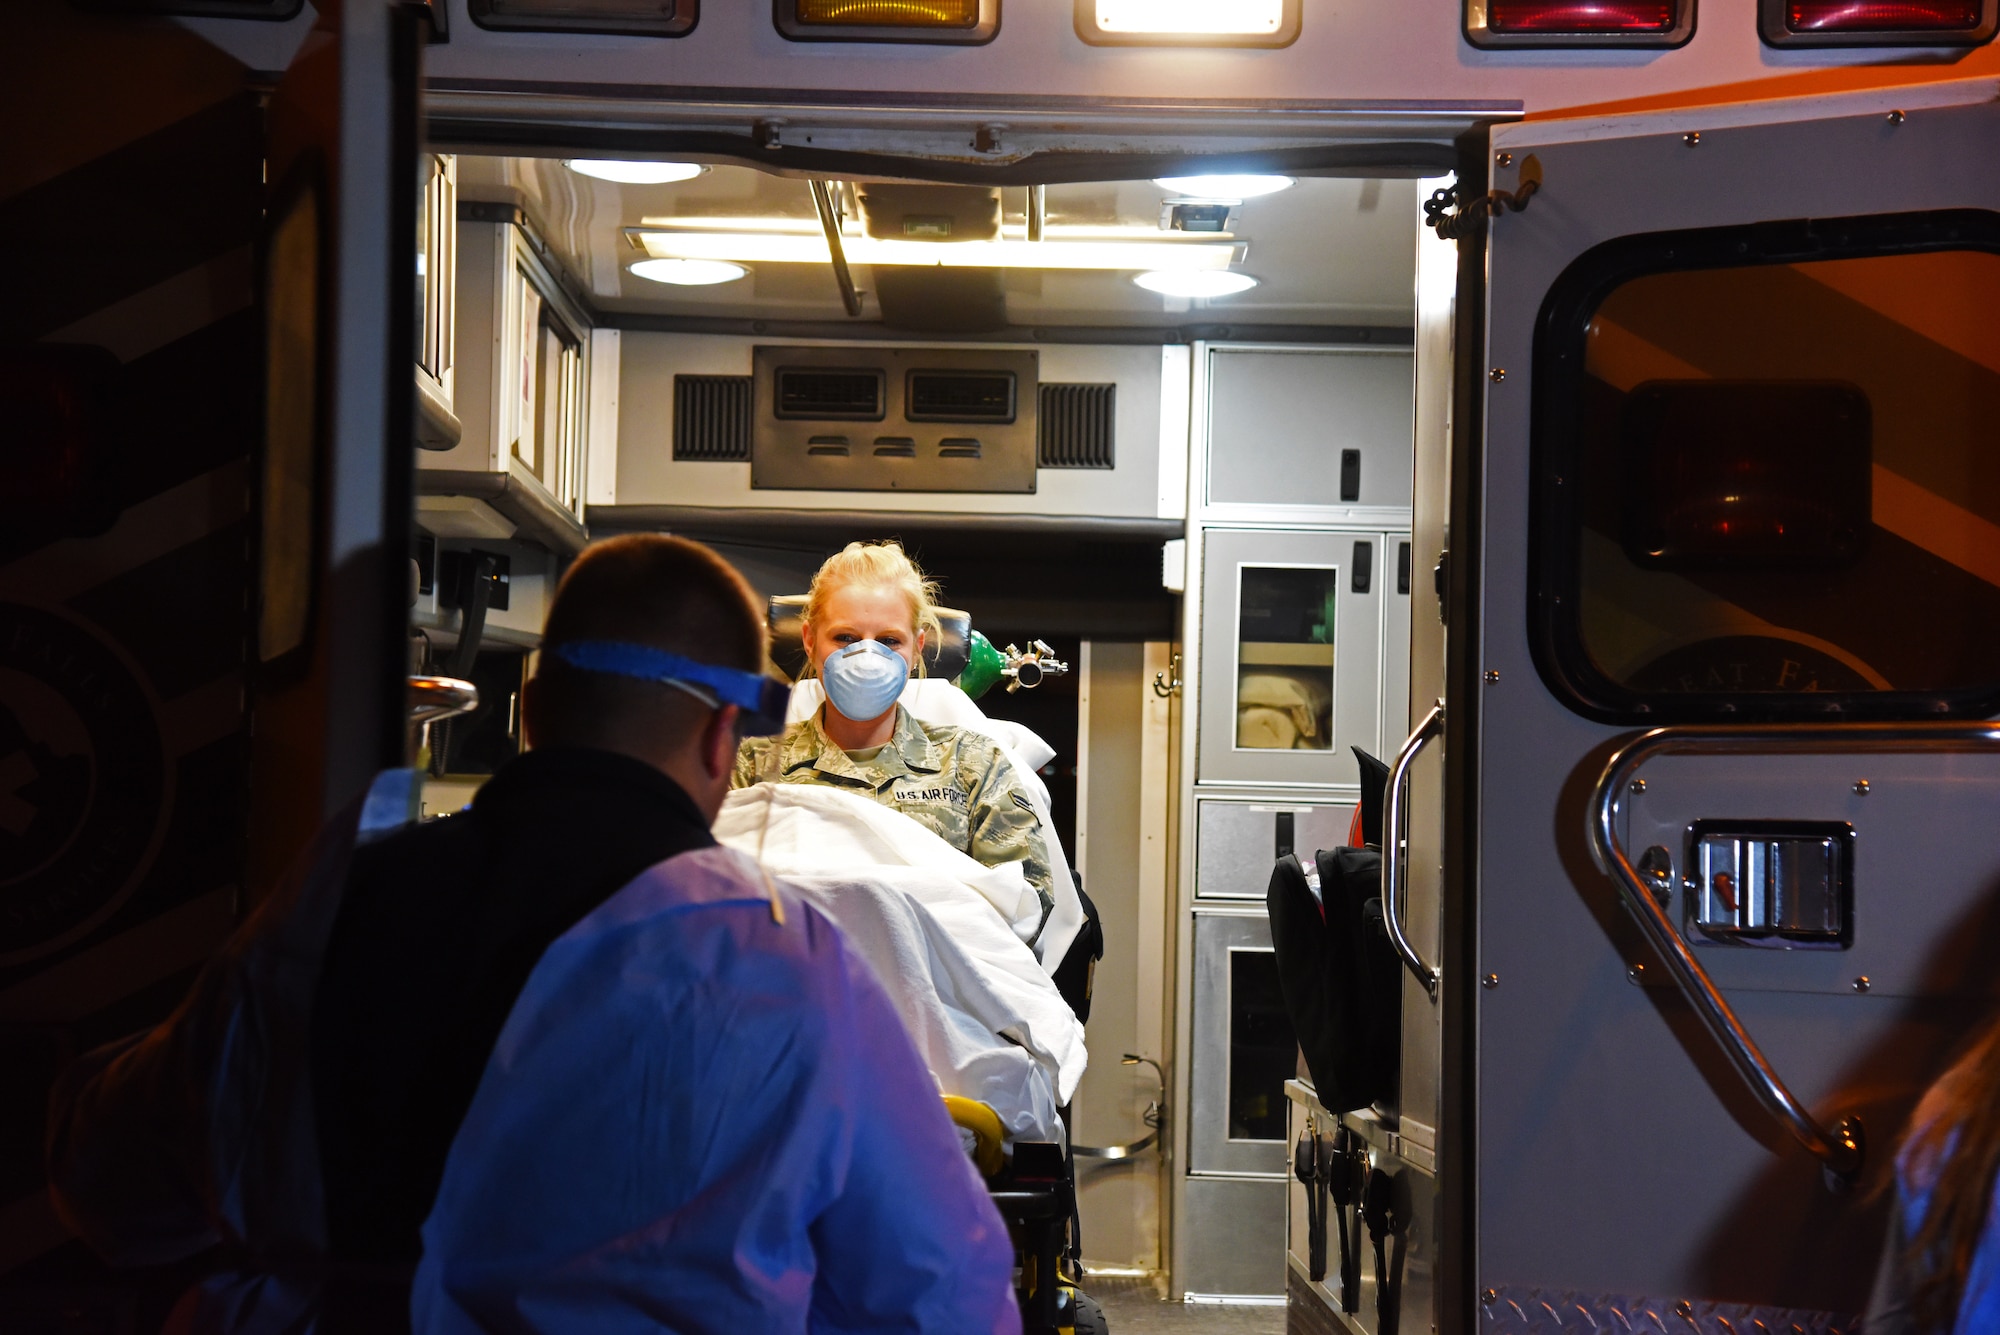 Airman 1st Class Kaitlyn Arteaga, 341st Medical Operations Squadron physical therapy technician, is loaded into the back of an ambulance by a Benefis Health System emergency responder during an Ebola exercise at the Malmstrom Air Force Base Clinic Nov. 25. The exercise was performed in conjunction with Great Falls Emergency Services, Great Falls Fire/Rescue, the Great Falls Clinic, Benefis Health System and the Cascade City-County Health Department. (U.S. Air Force photo/Airman 1st Class Collin Schmidt) 